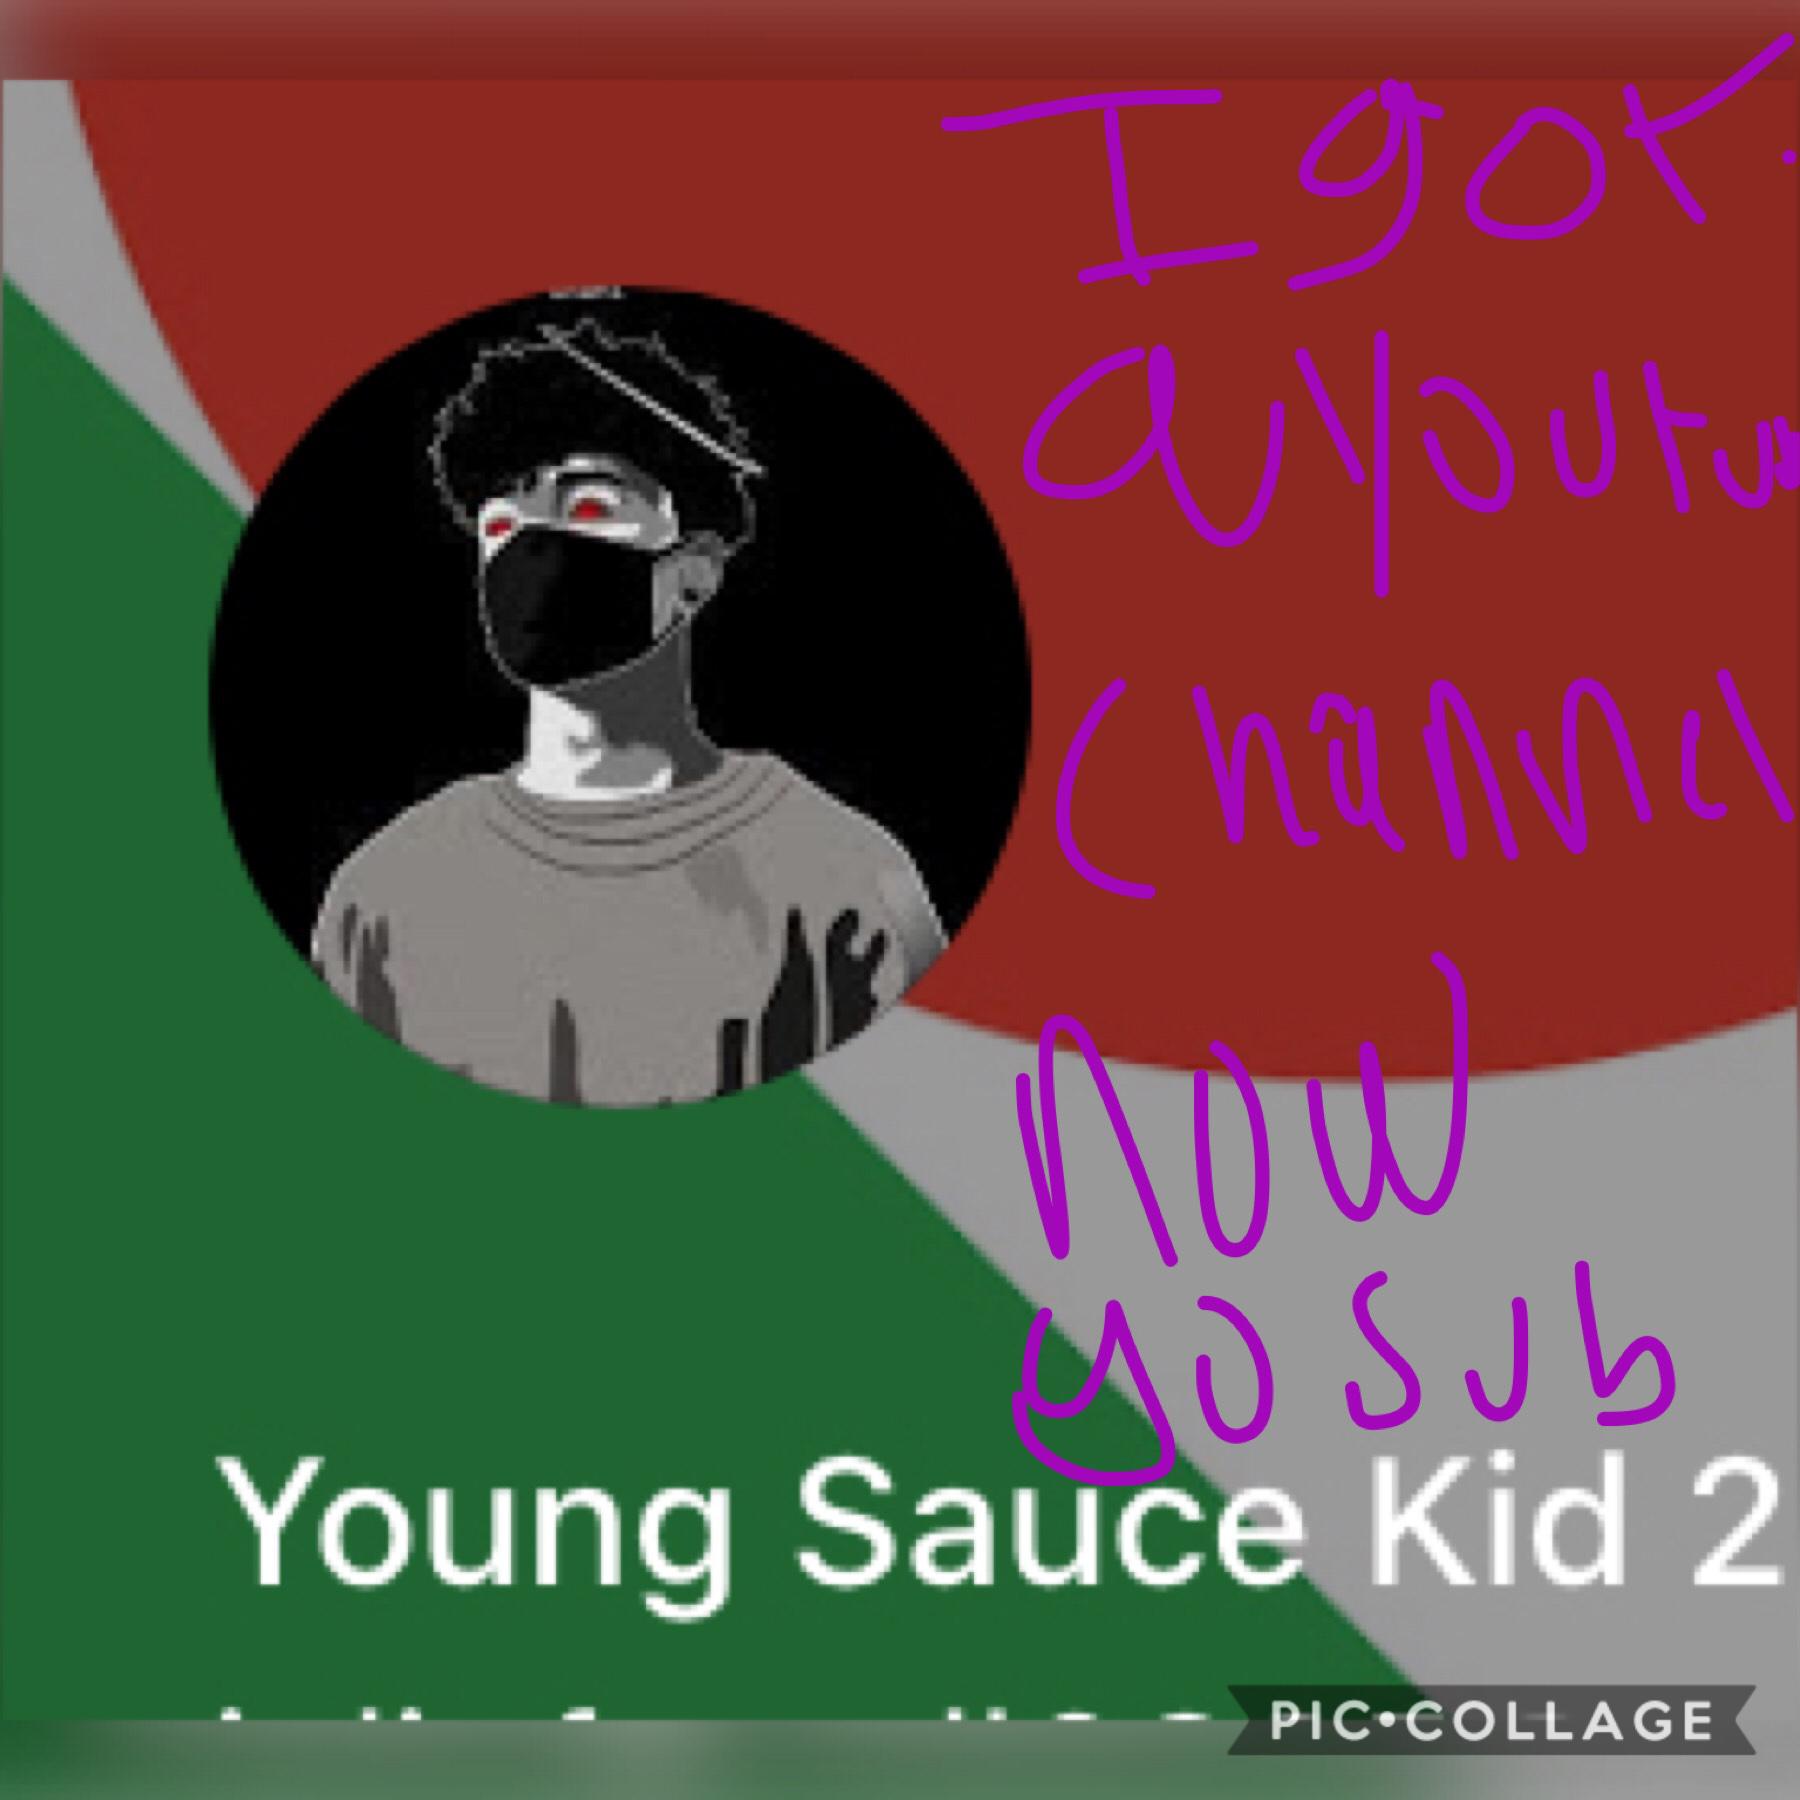 Go subscribe to my YouTube channel Young Sauce Kid 2